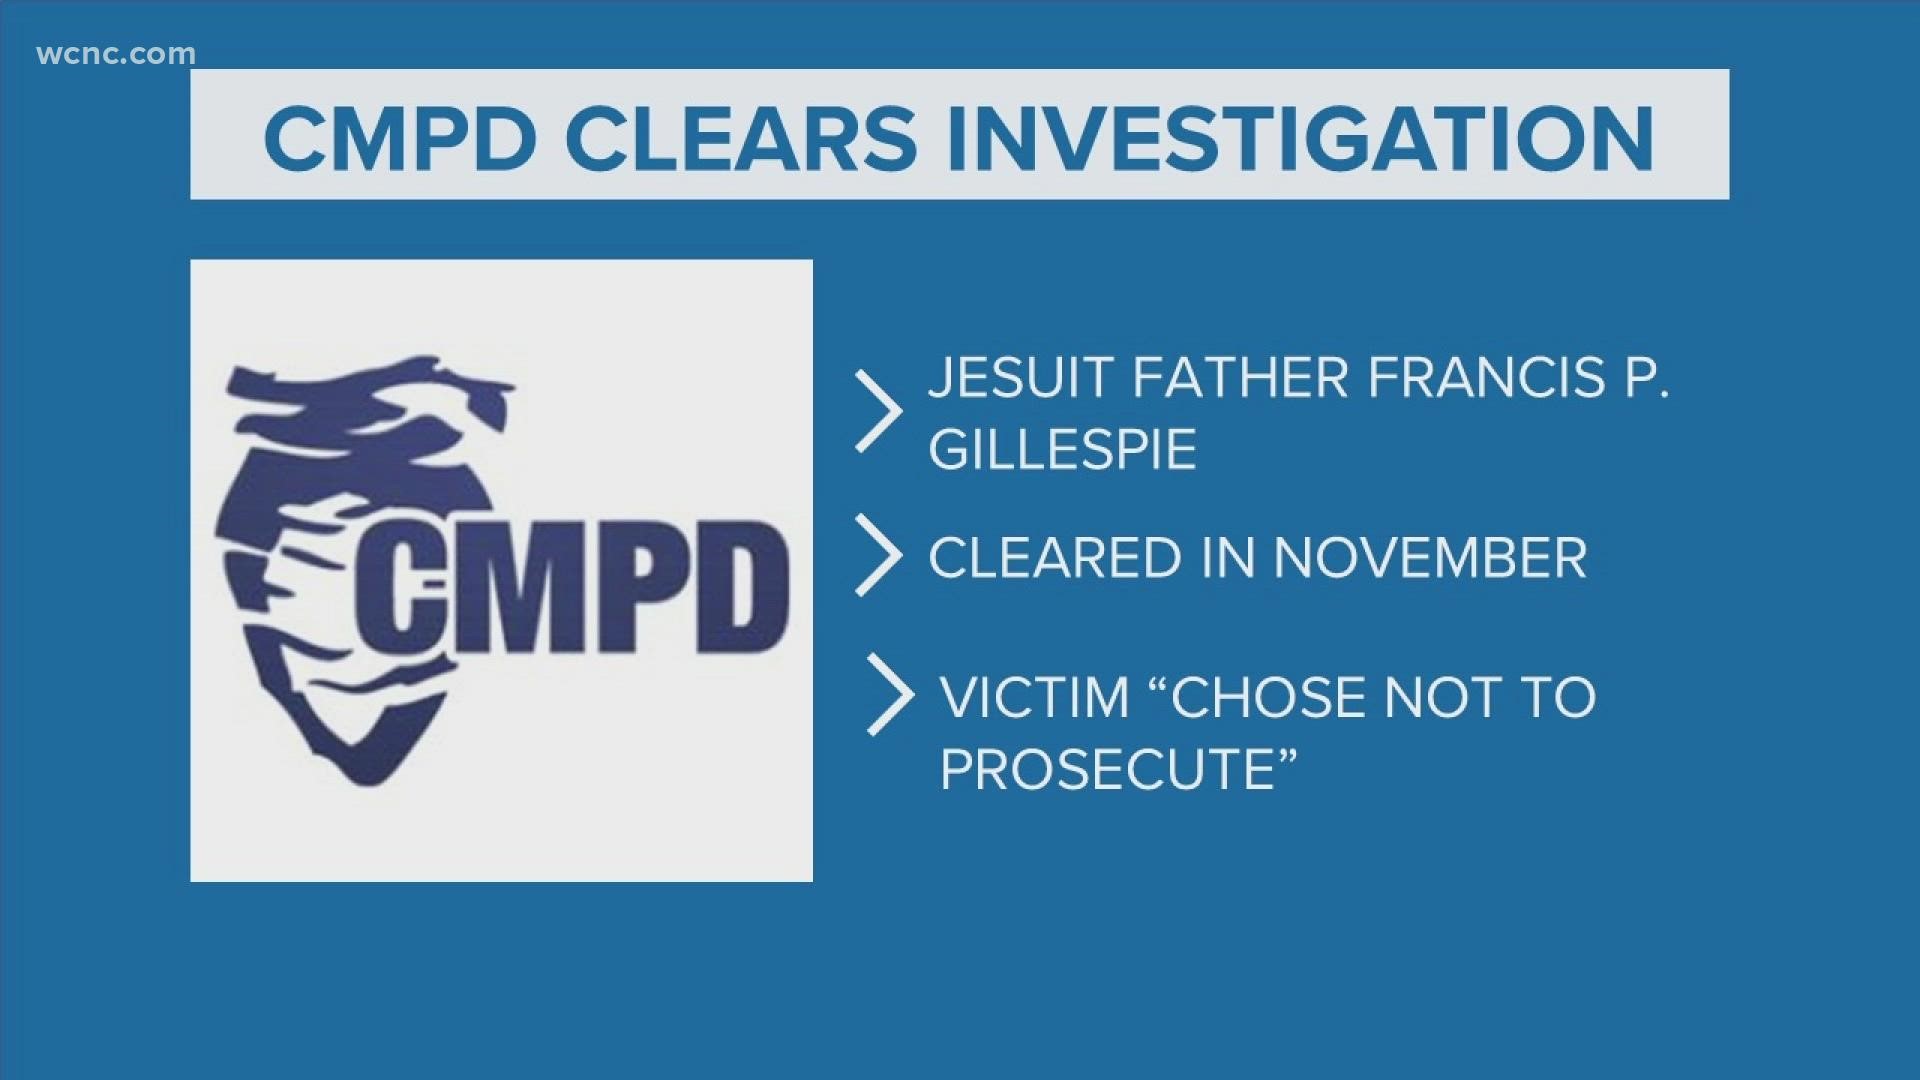 Records reveal CMPD cleared its investigation into Father Francis P. Gillespie, but a civil lawsuit against the former Charlotte priest and others remains pending.